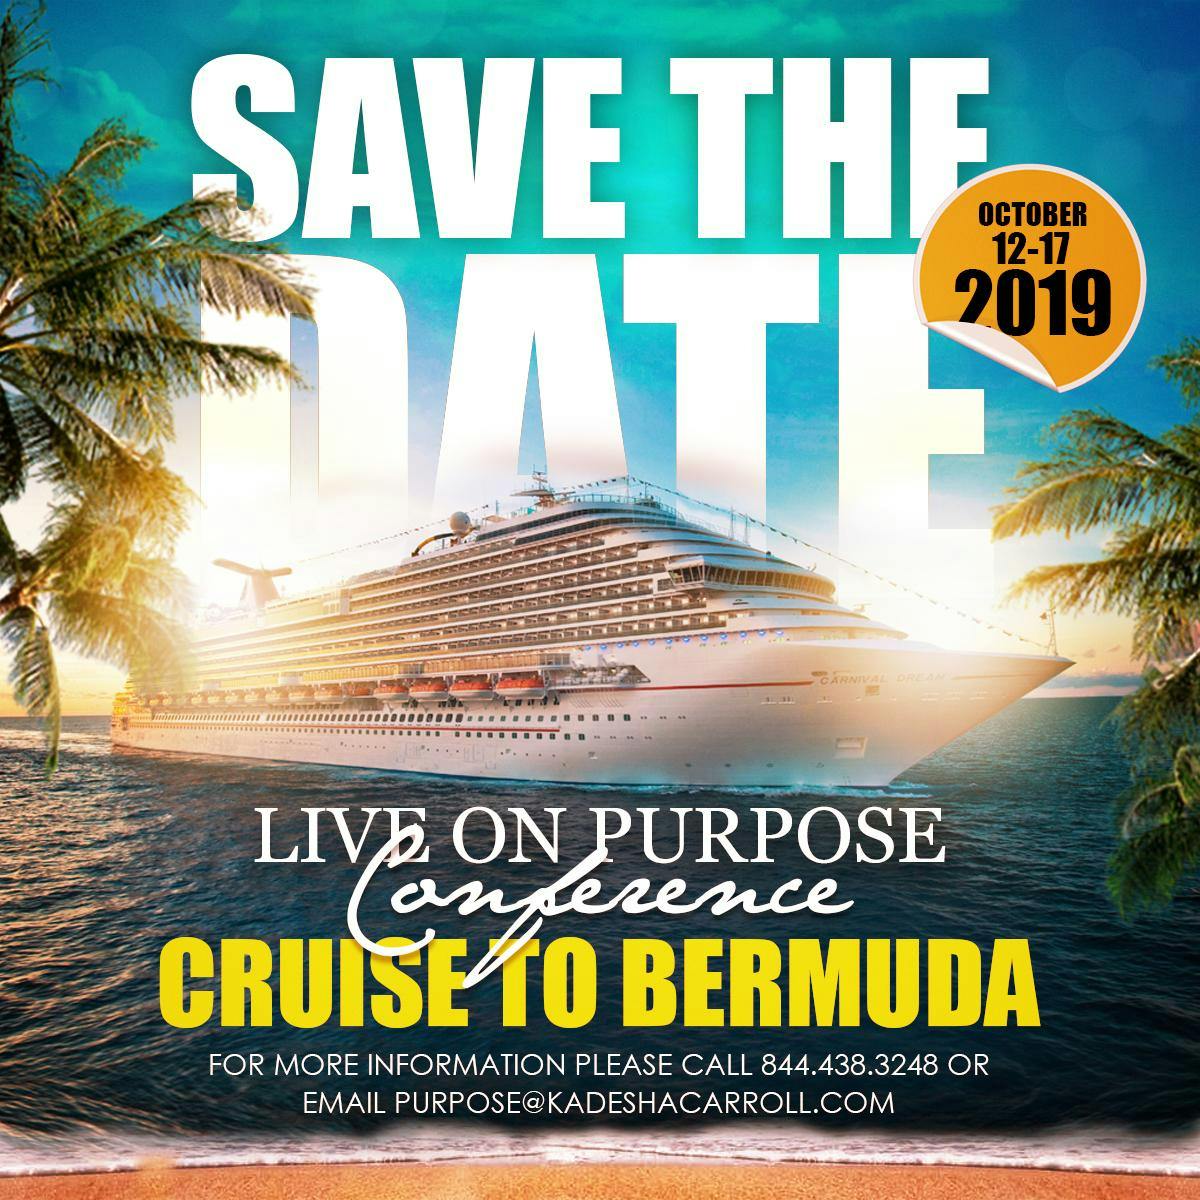 Live on Purpose Conference - Cruise to Bermuda!